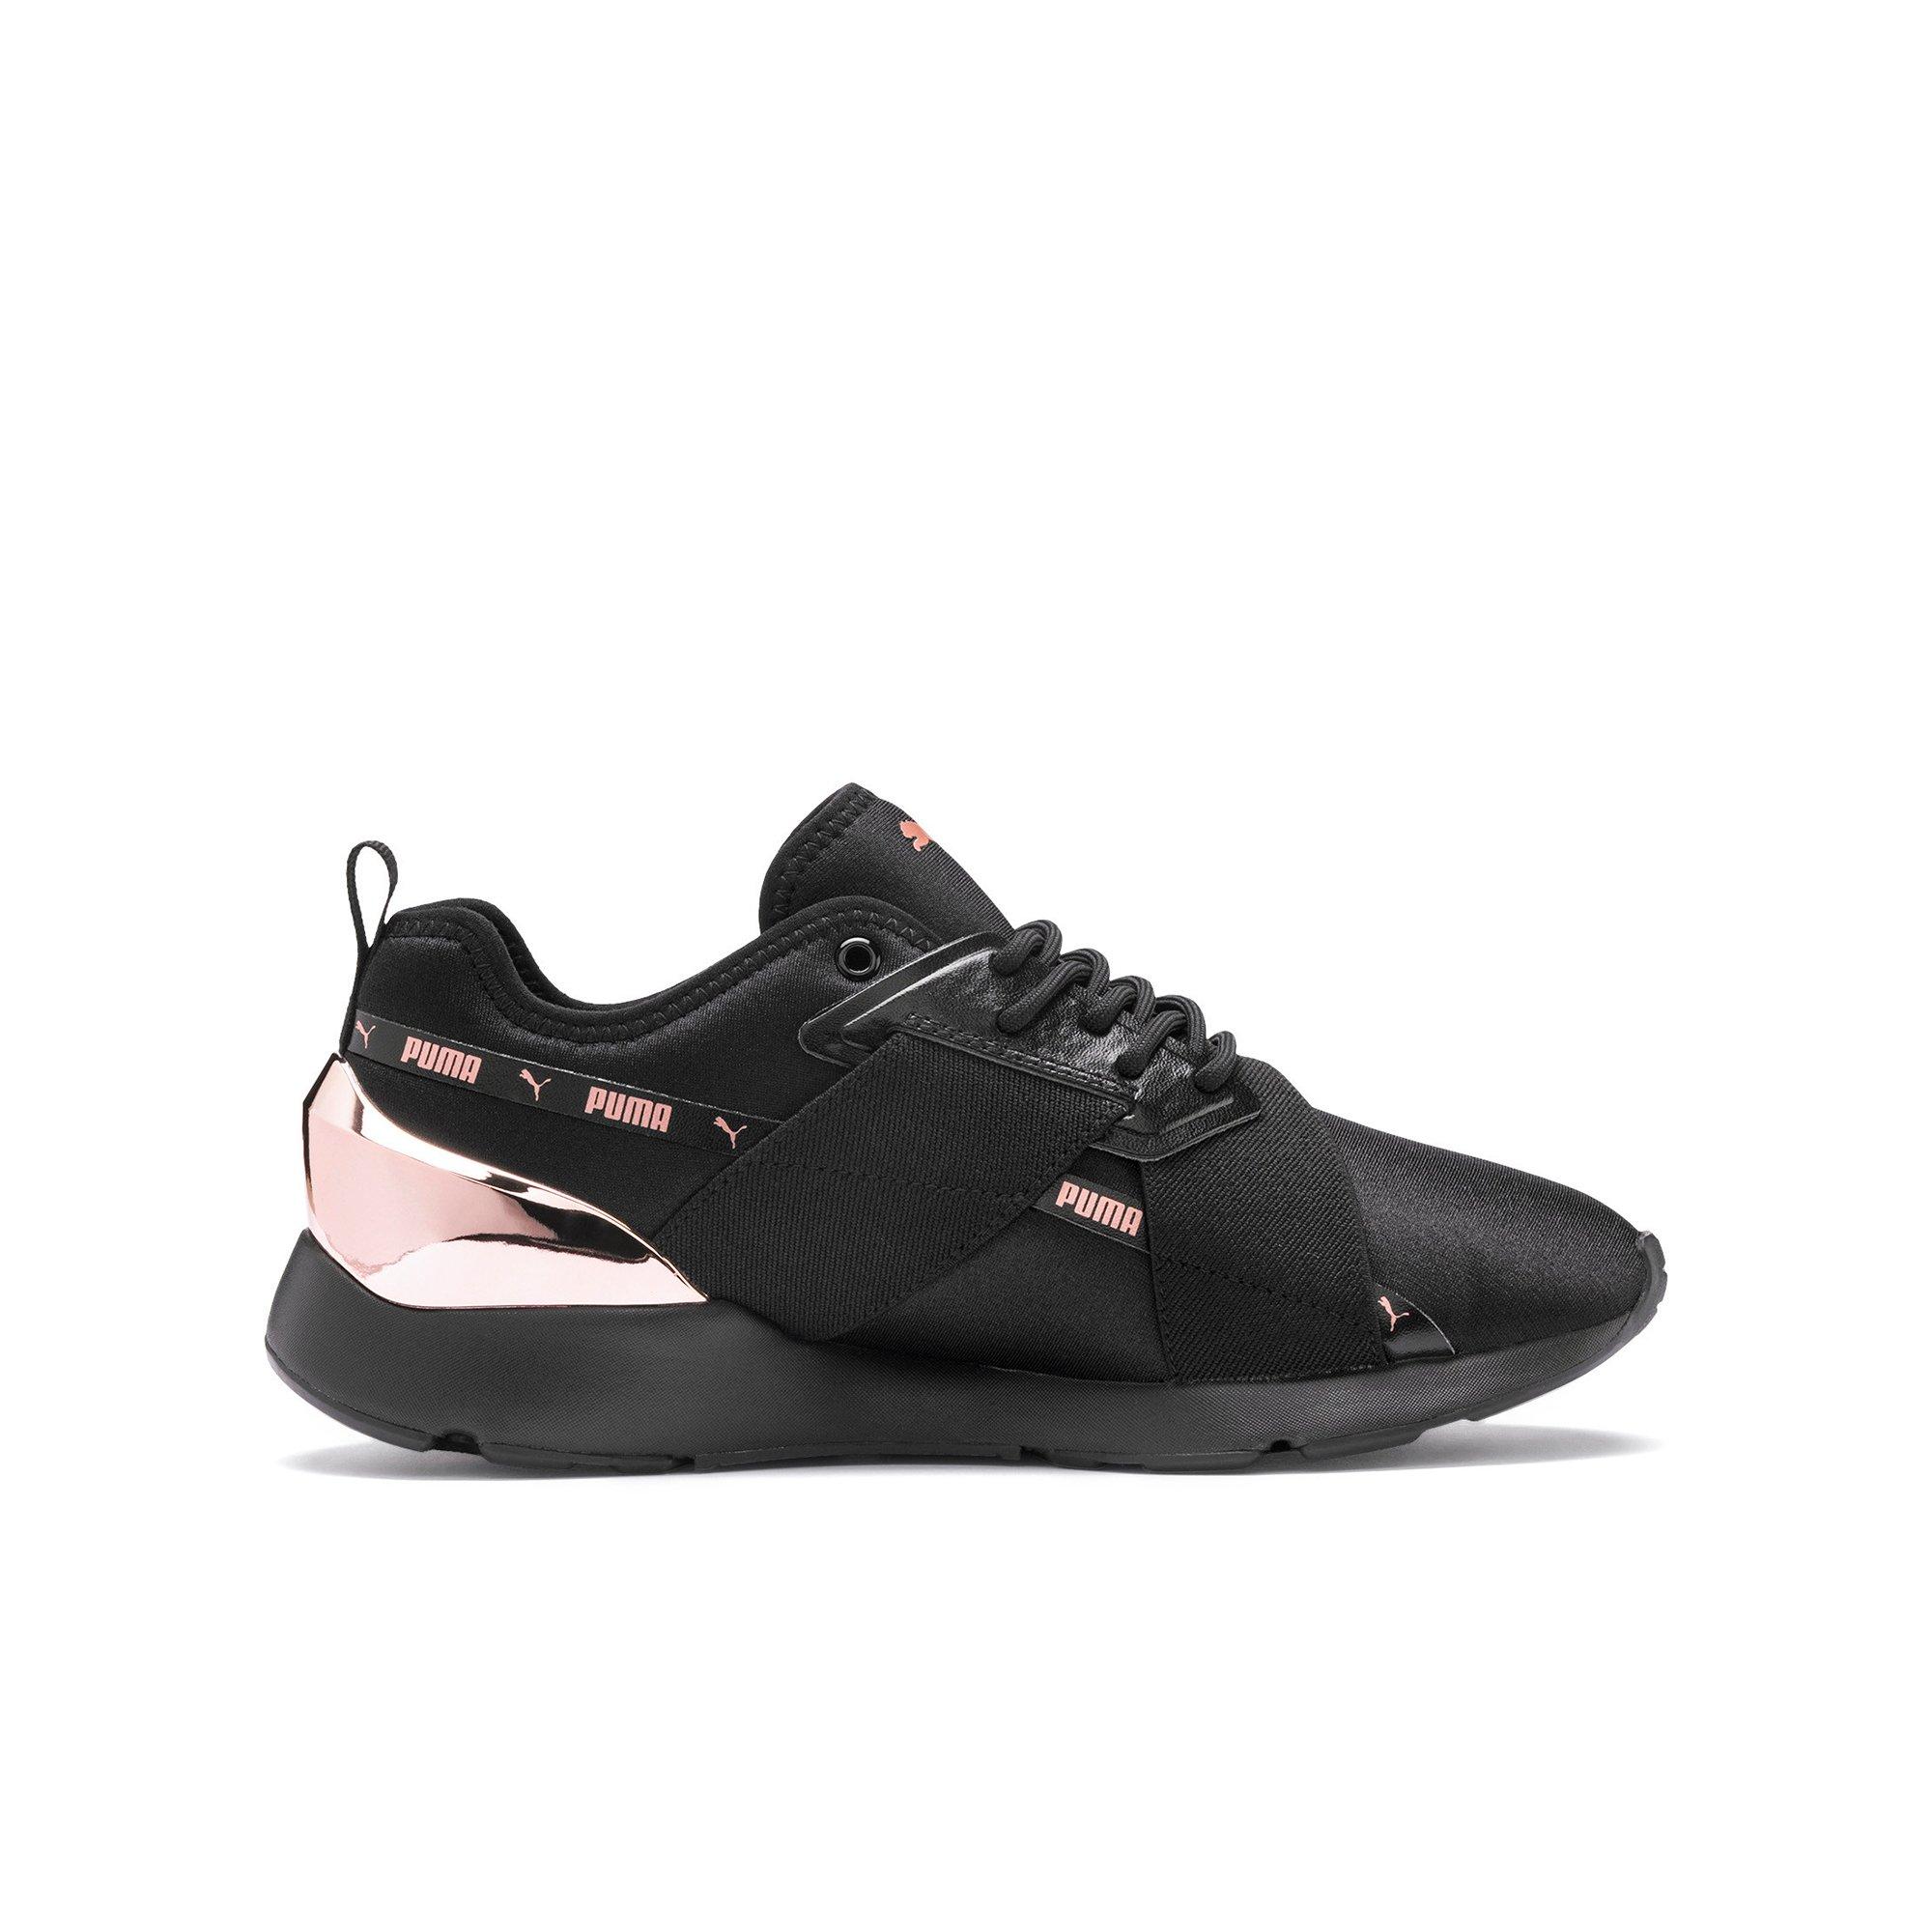 black puma shoes with rose gold